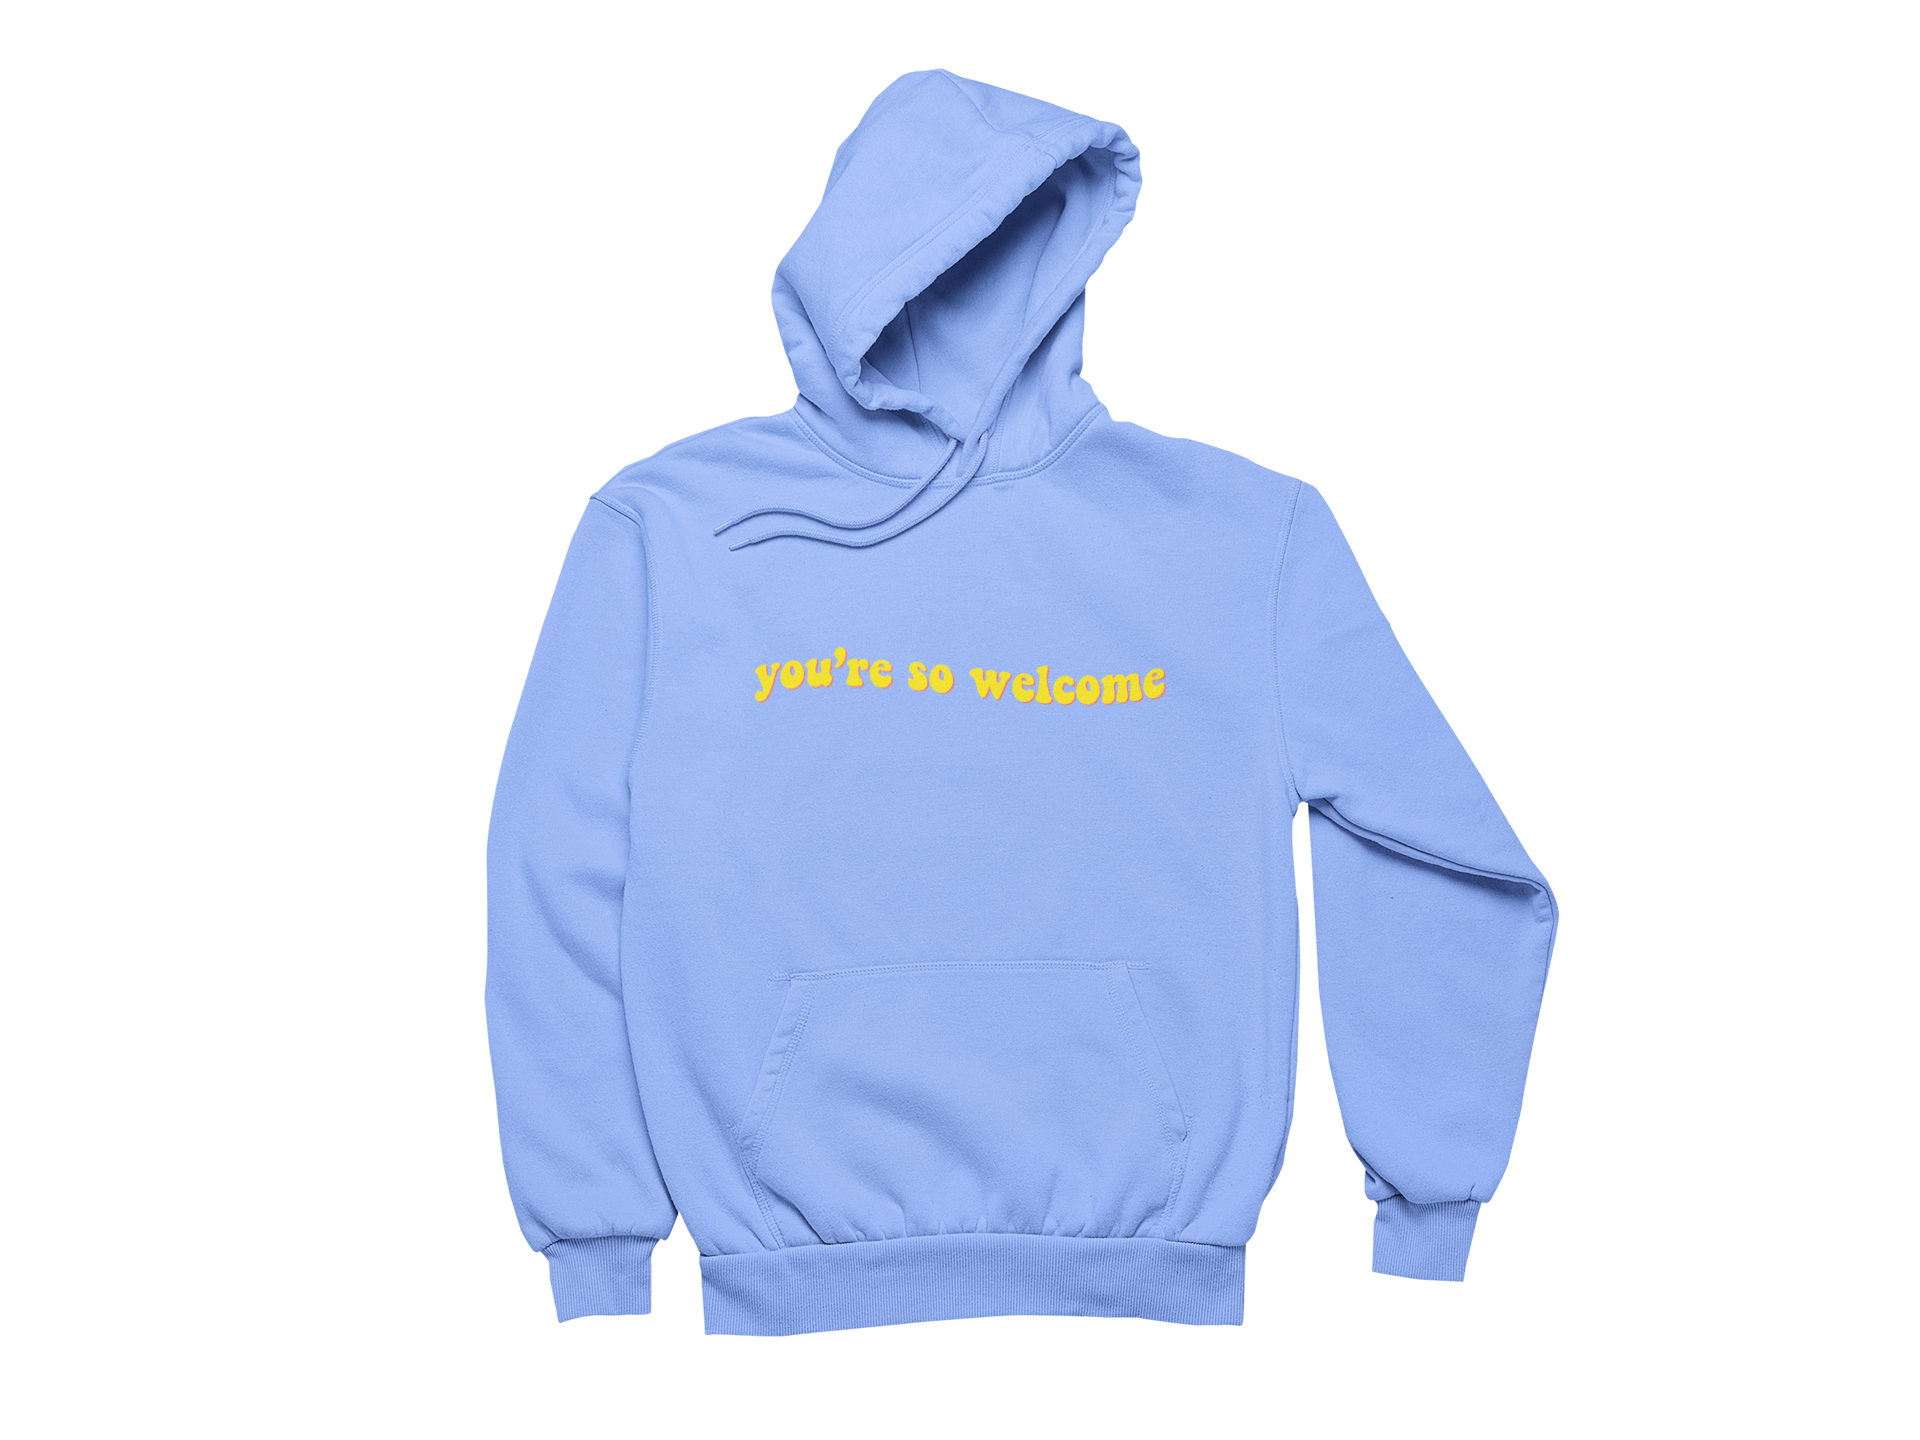 Thank Me Later Hoodie